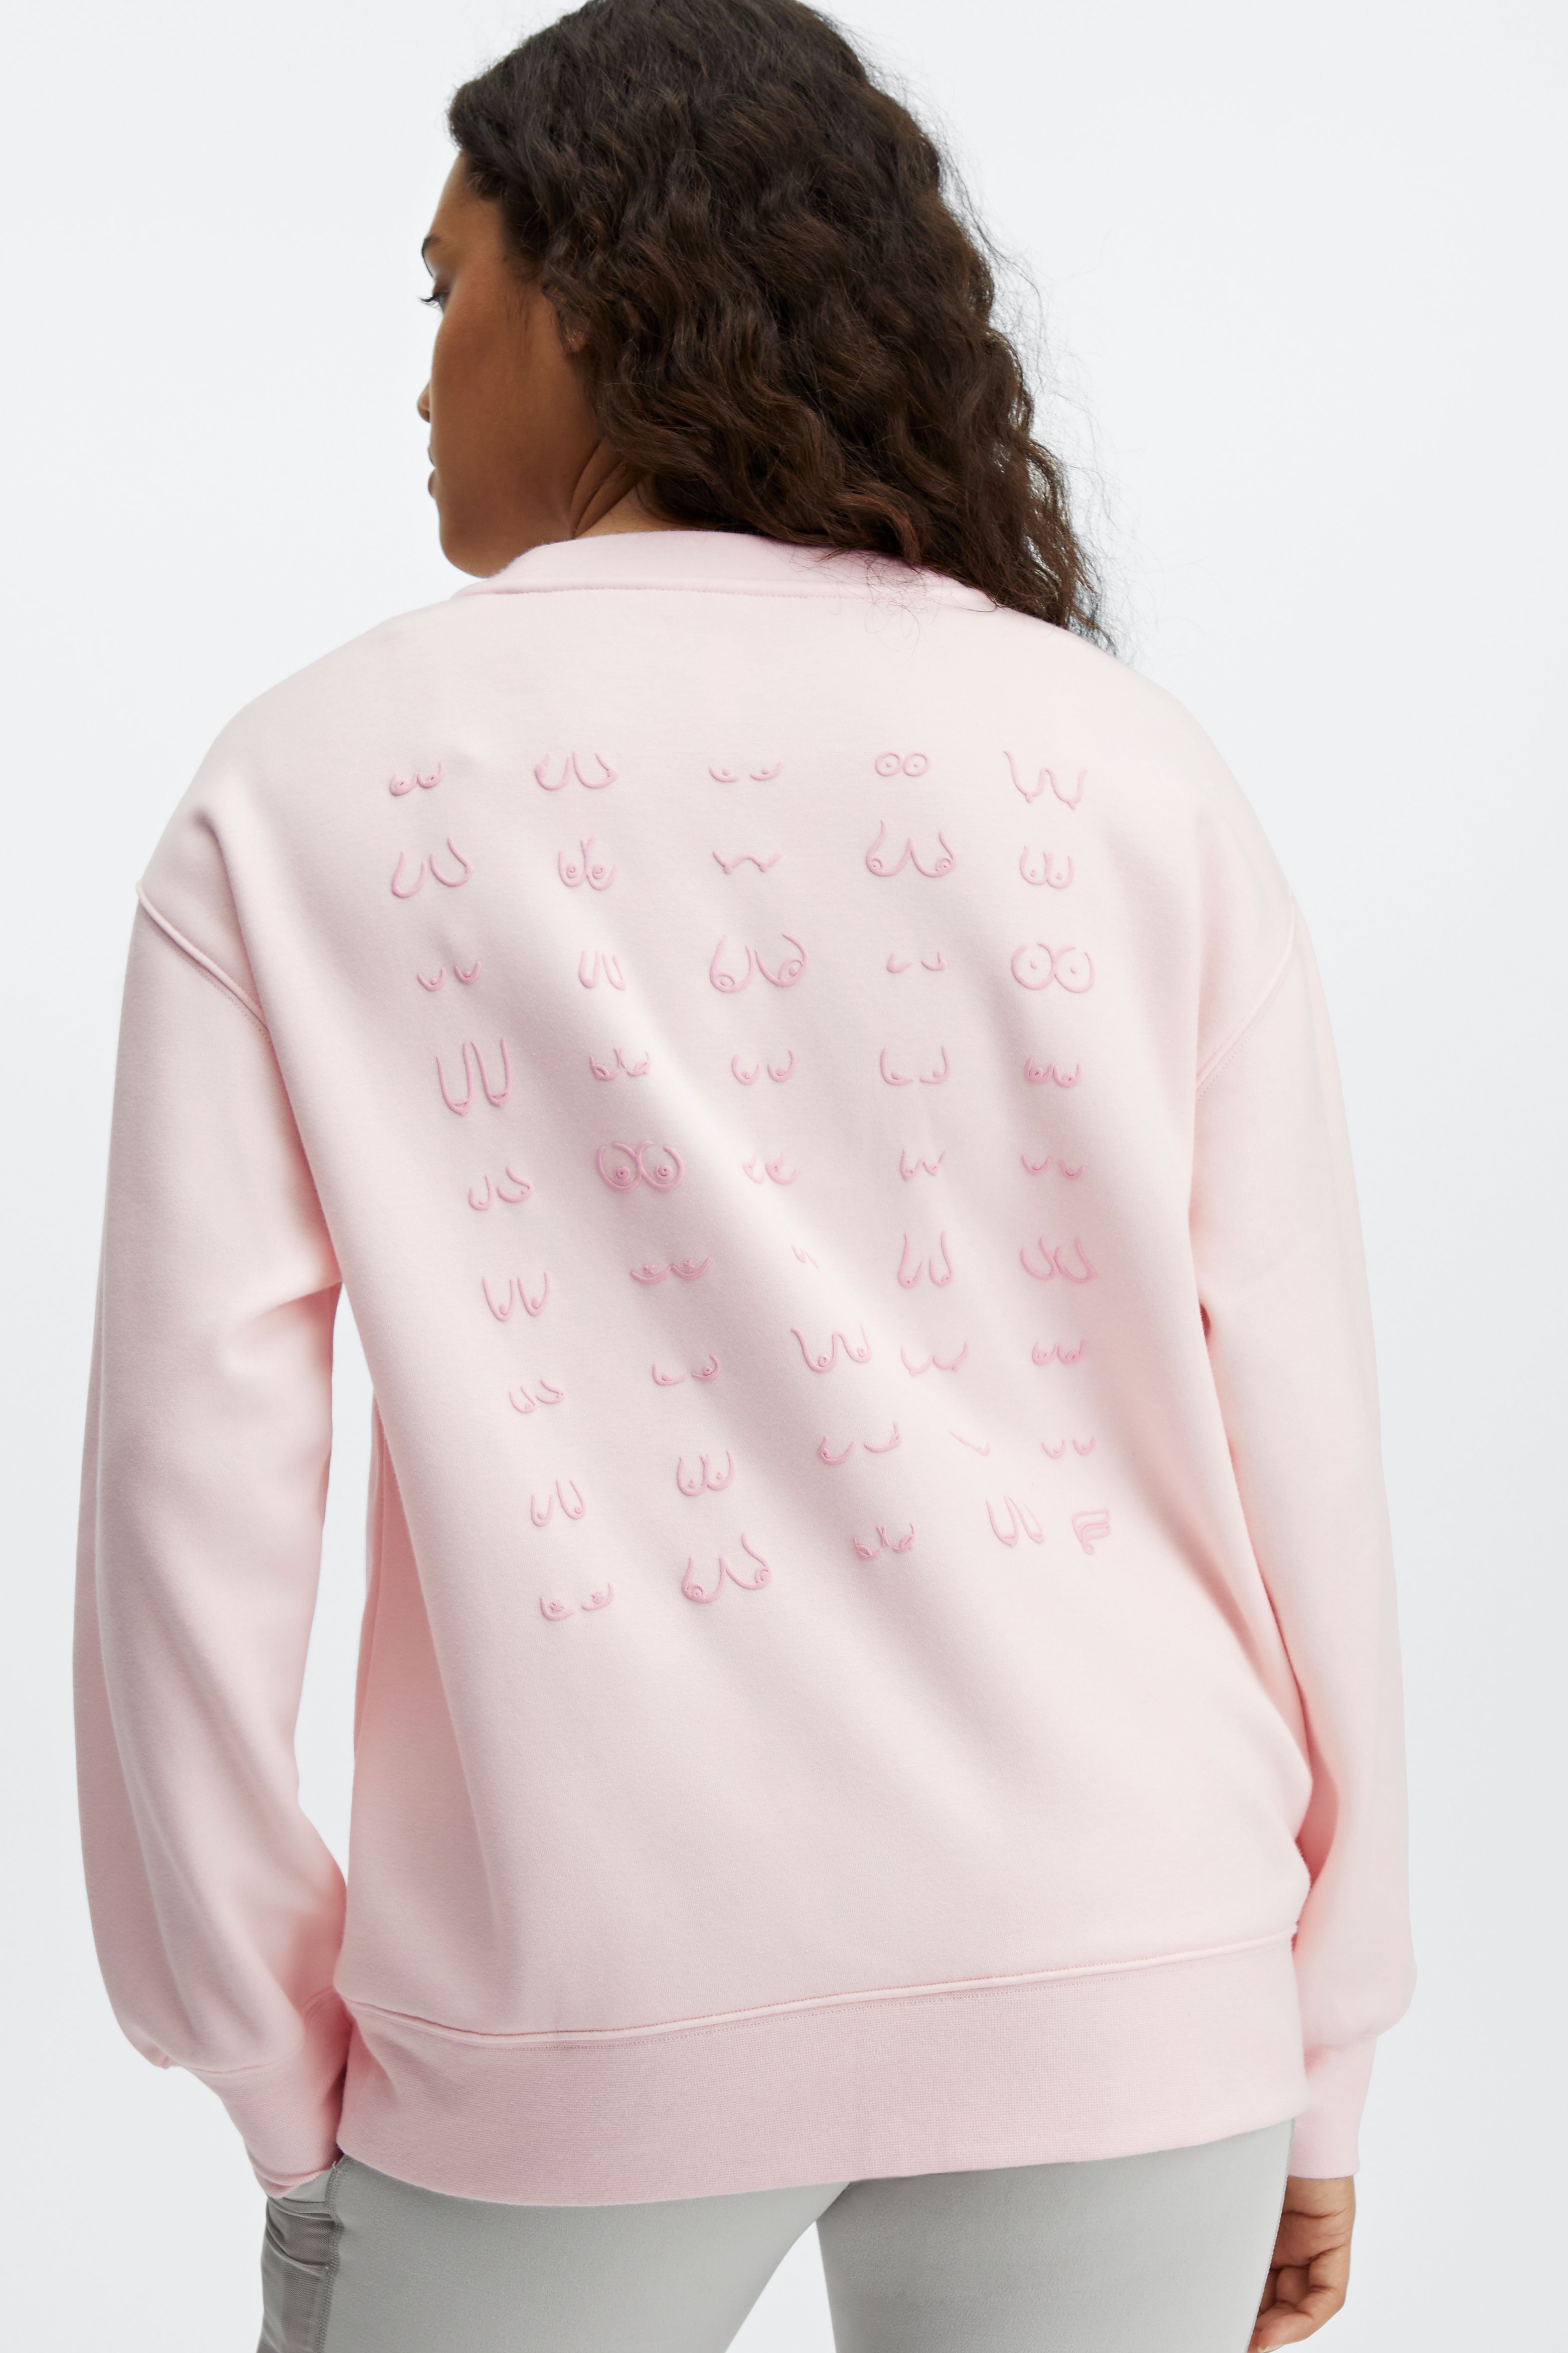 Fabletics launches custom Go-To Crewneck featuring illustration of women’s breasts in support of breast cancer awareness.